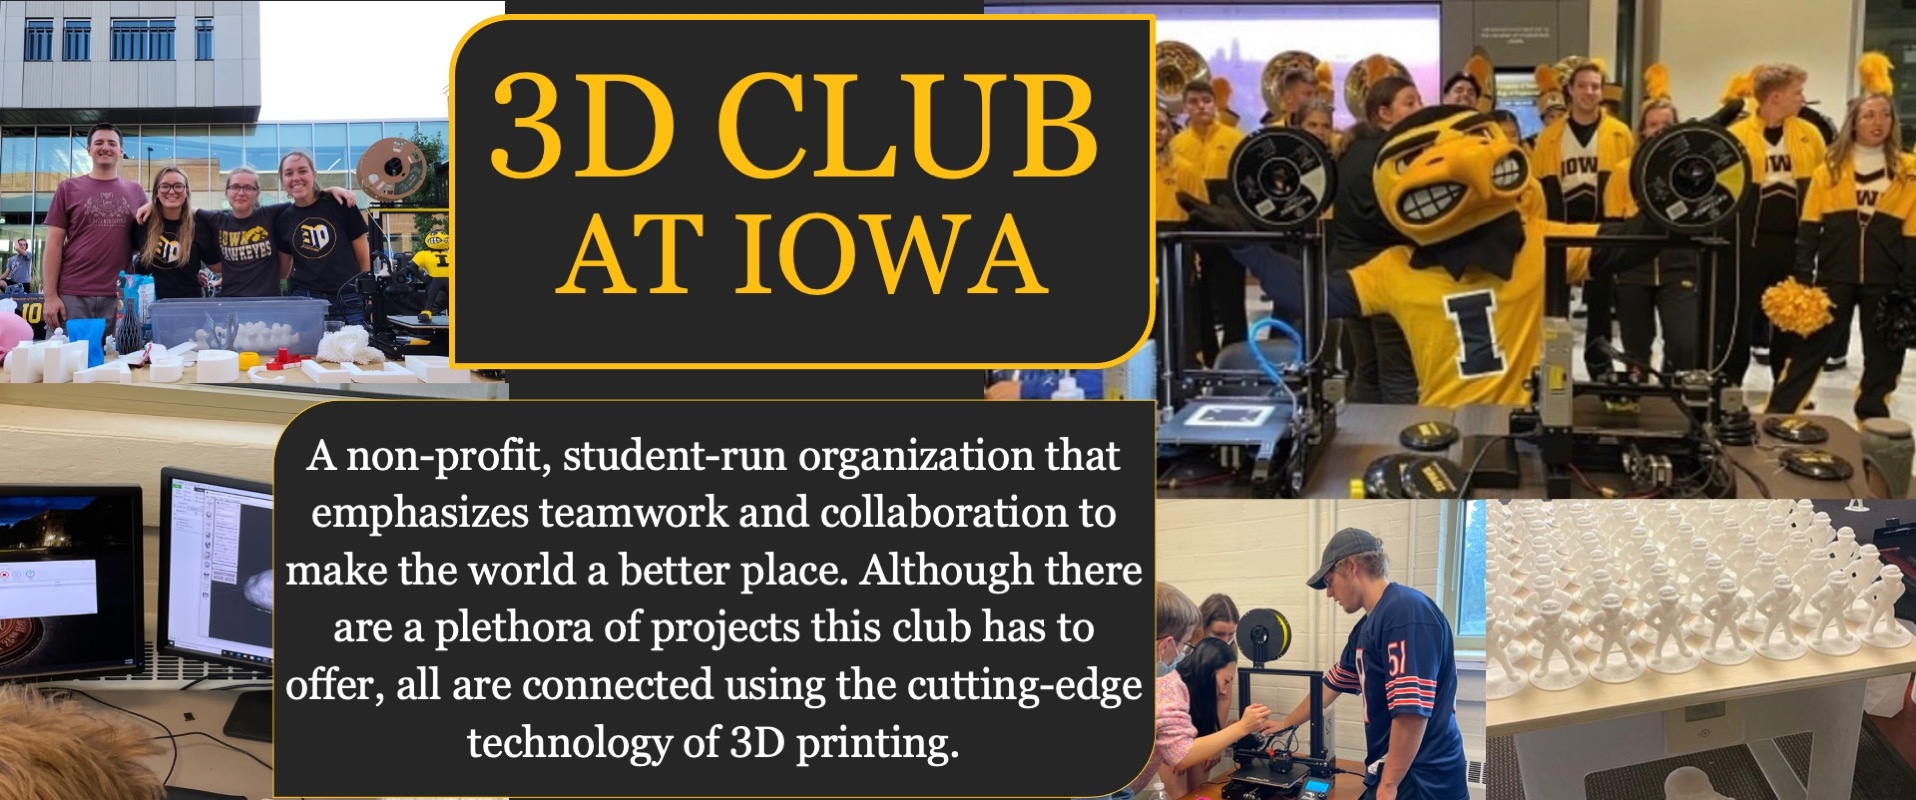 Iowa 3D Club; A non-profit, student-run organization that emphasizes teamwork and collaboration to make the world a better place. Although there are a plethora of projects this club has to offer, all are connected using the cutting-edge technology of 3D printing.